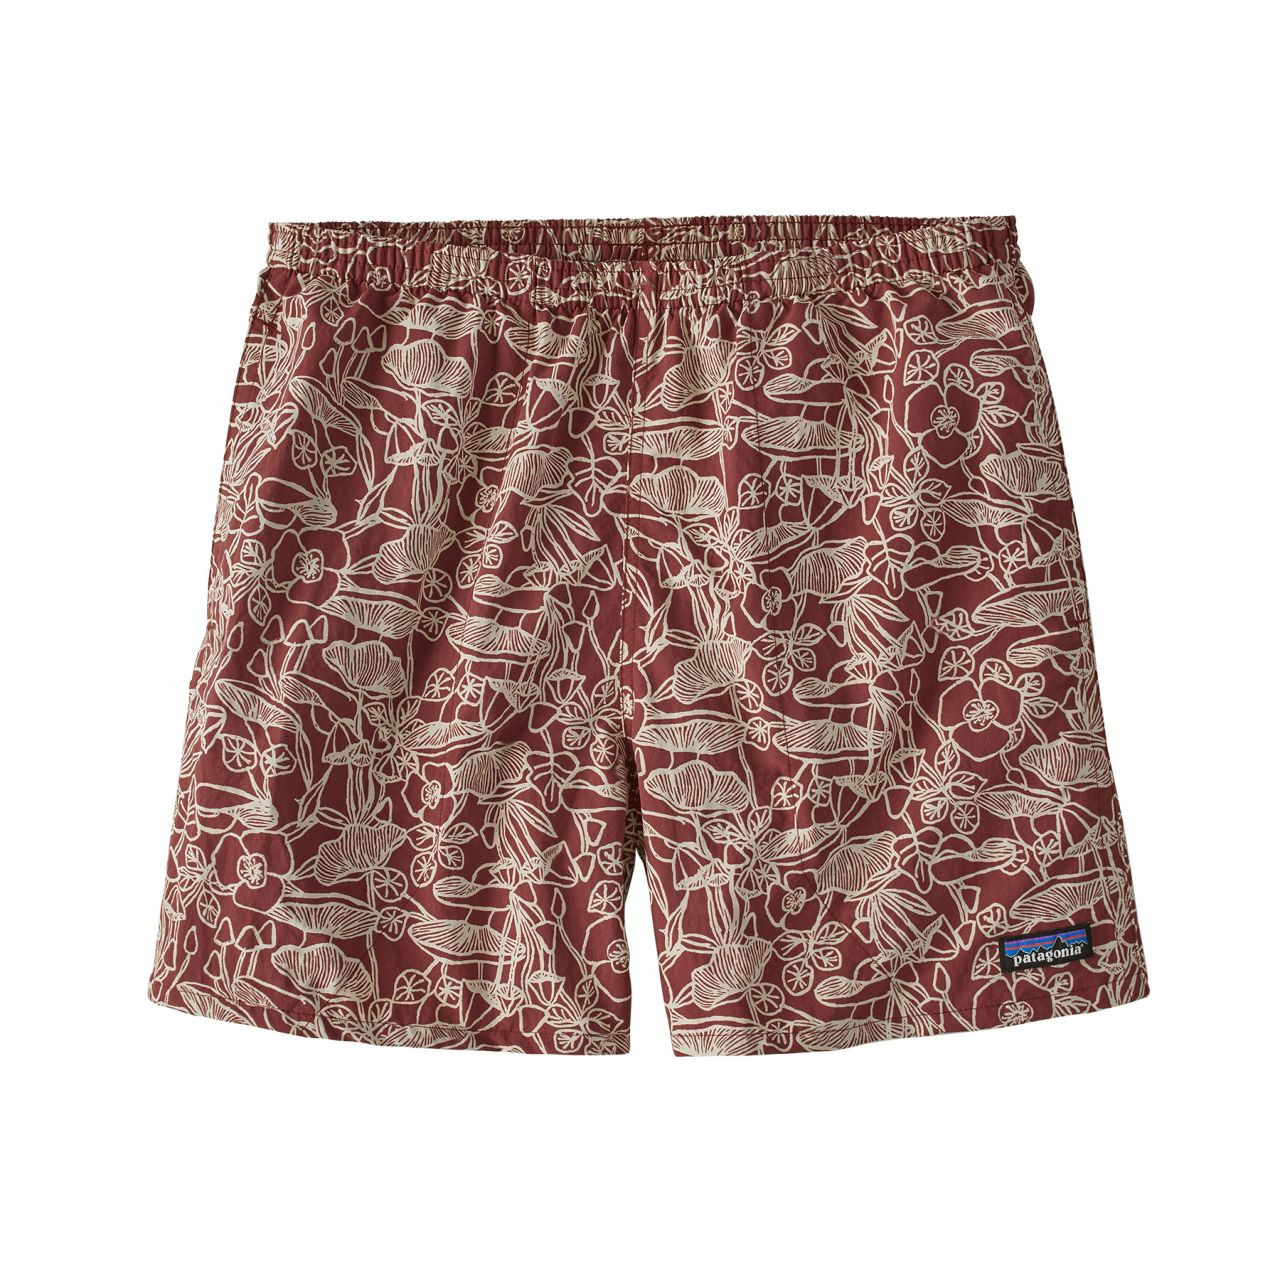 Need a Pair of Swim Trunks? Try Patagonia's Iconic Baggies. - InsideHook